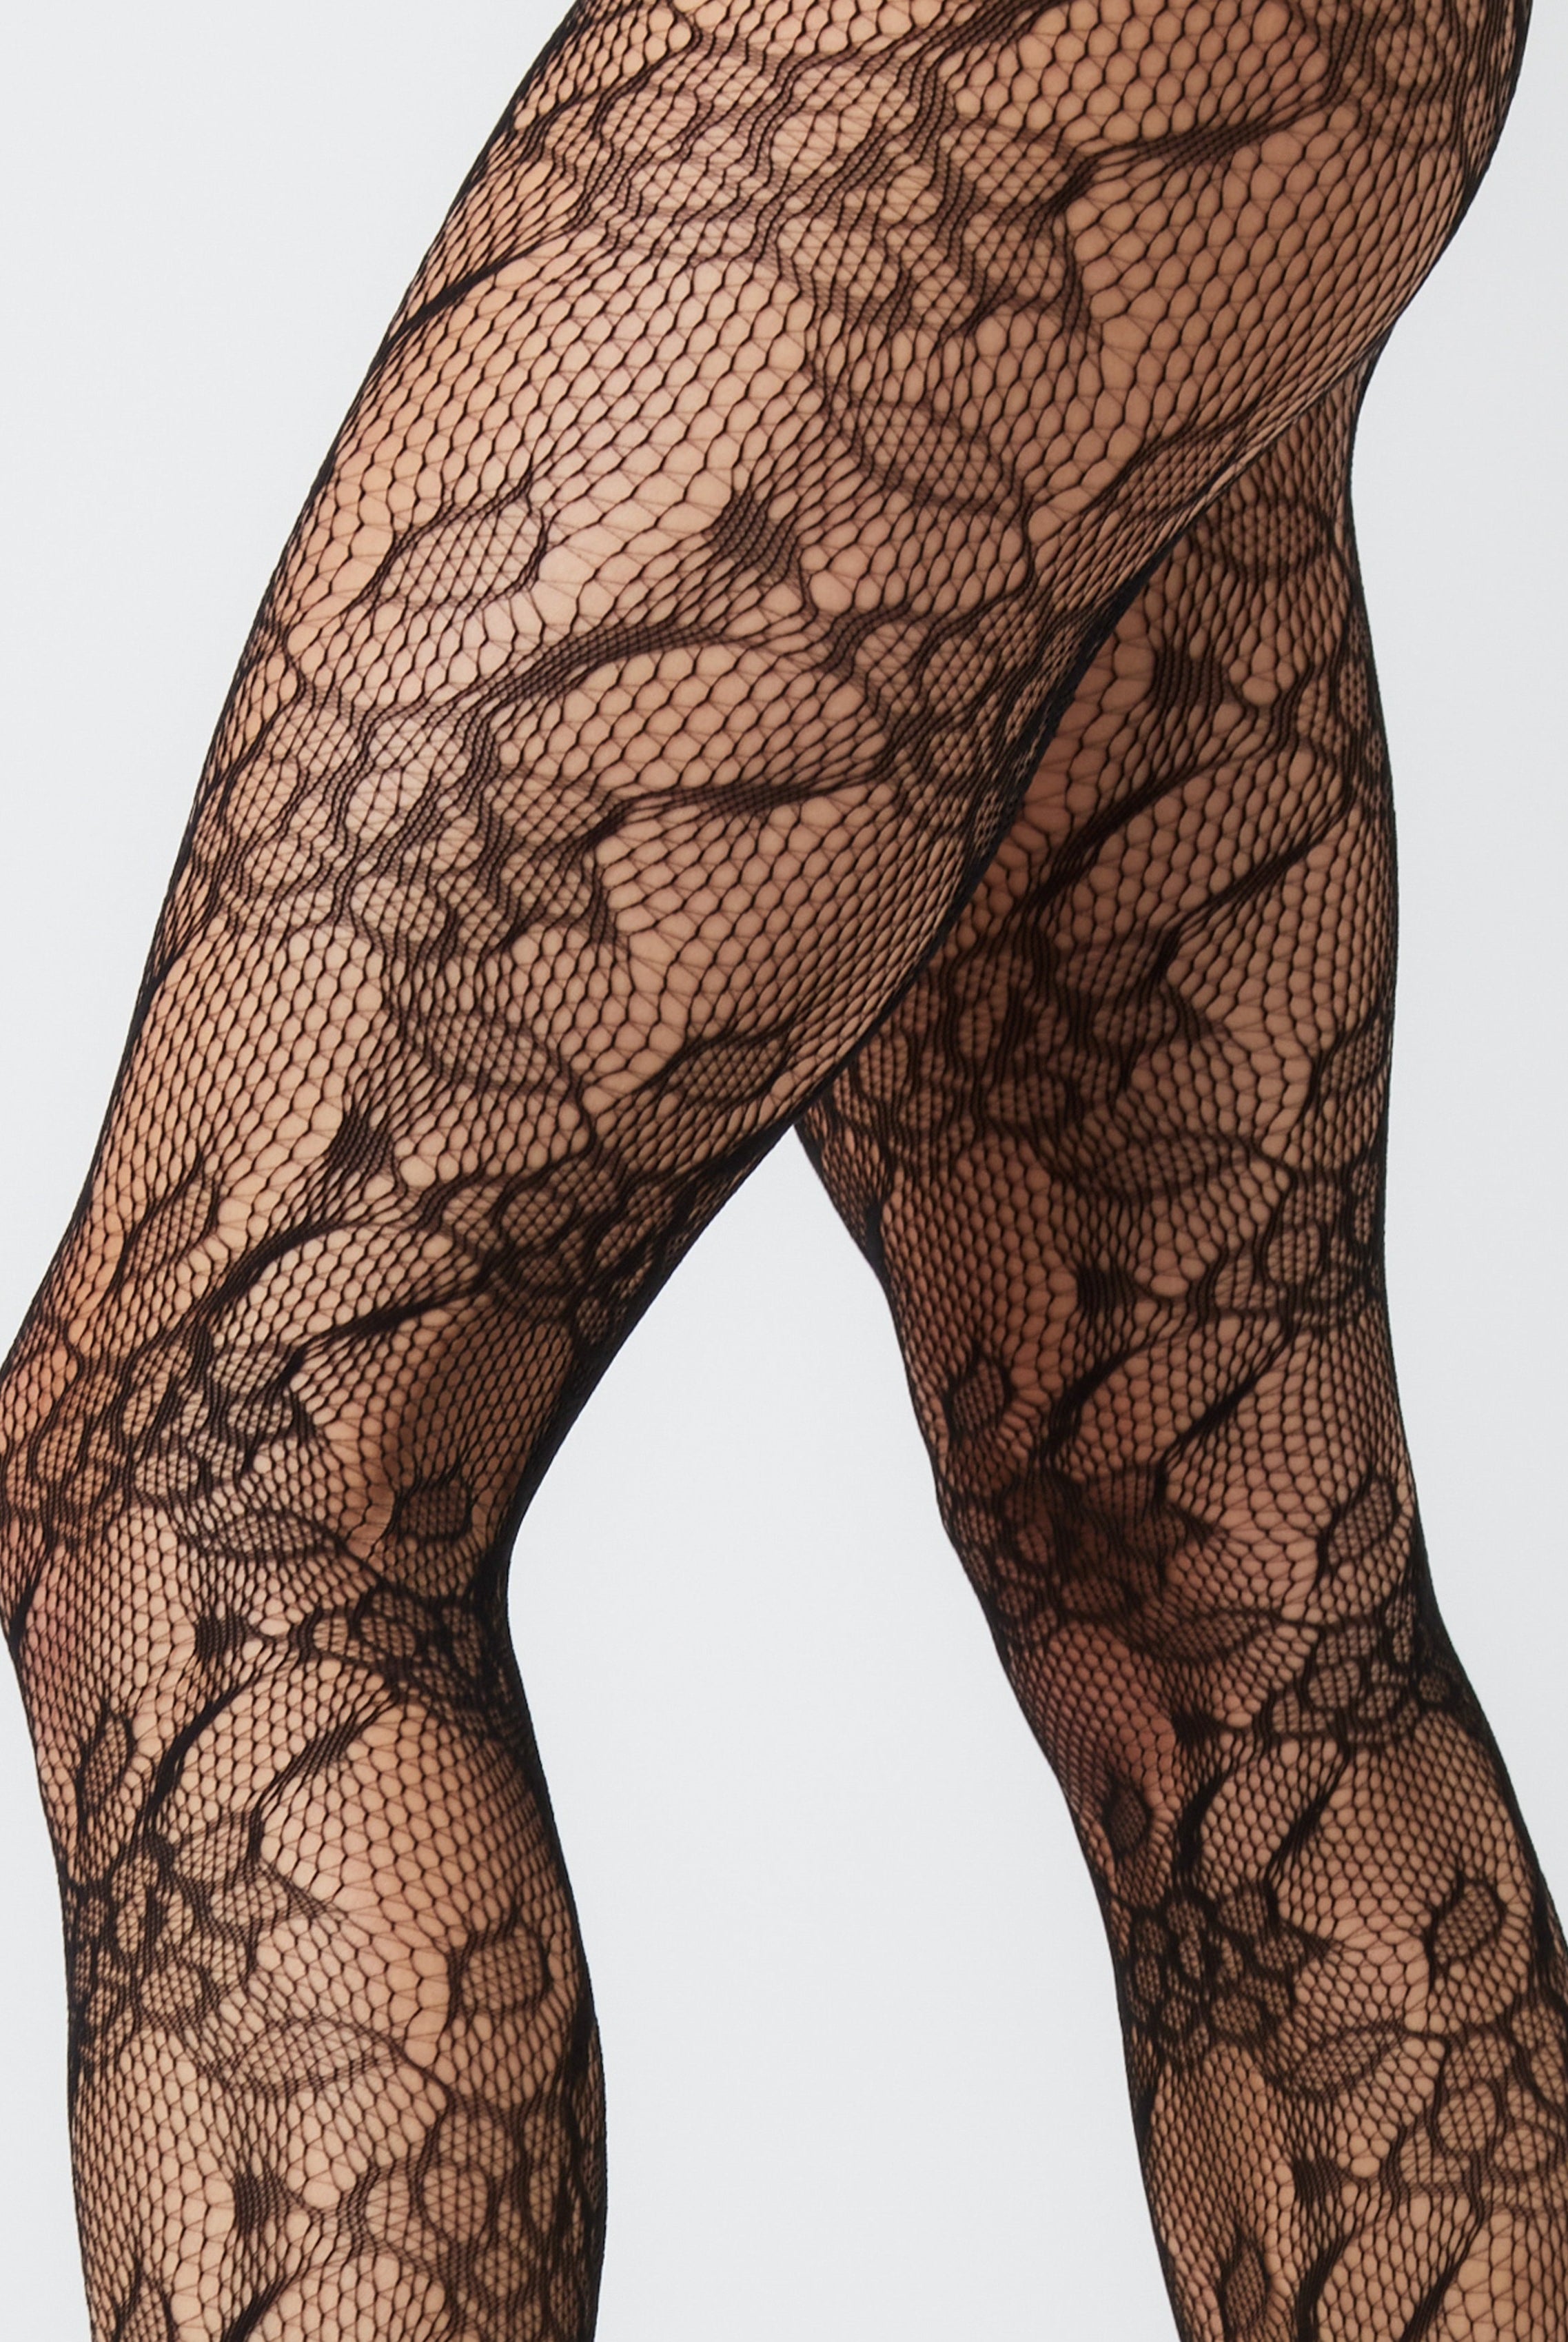 Lace Floral fishnet Tights in Black | Hosiery | Lace Tights | Floral Tights | Grunge | Grunge sleaze | Elevated indie | Indie | e girl | Whimsygoth | plaza core | party | Occasion | Date night | Cocktails | Out out | Halloween | Streetwear | Streetstyle | Women | Accessories | Accessory | Winter | Autumn | Winter accessories | Autumn accessories| 